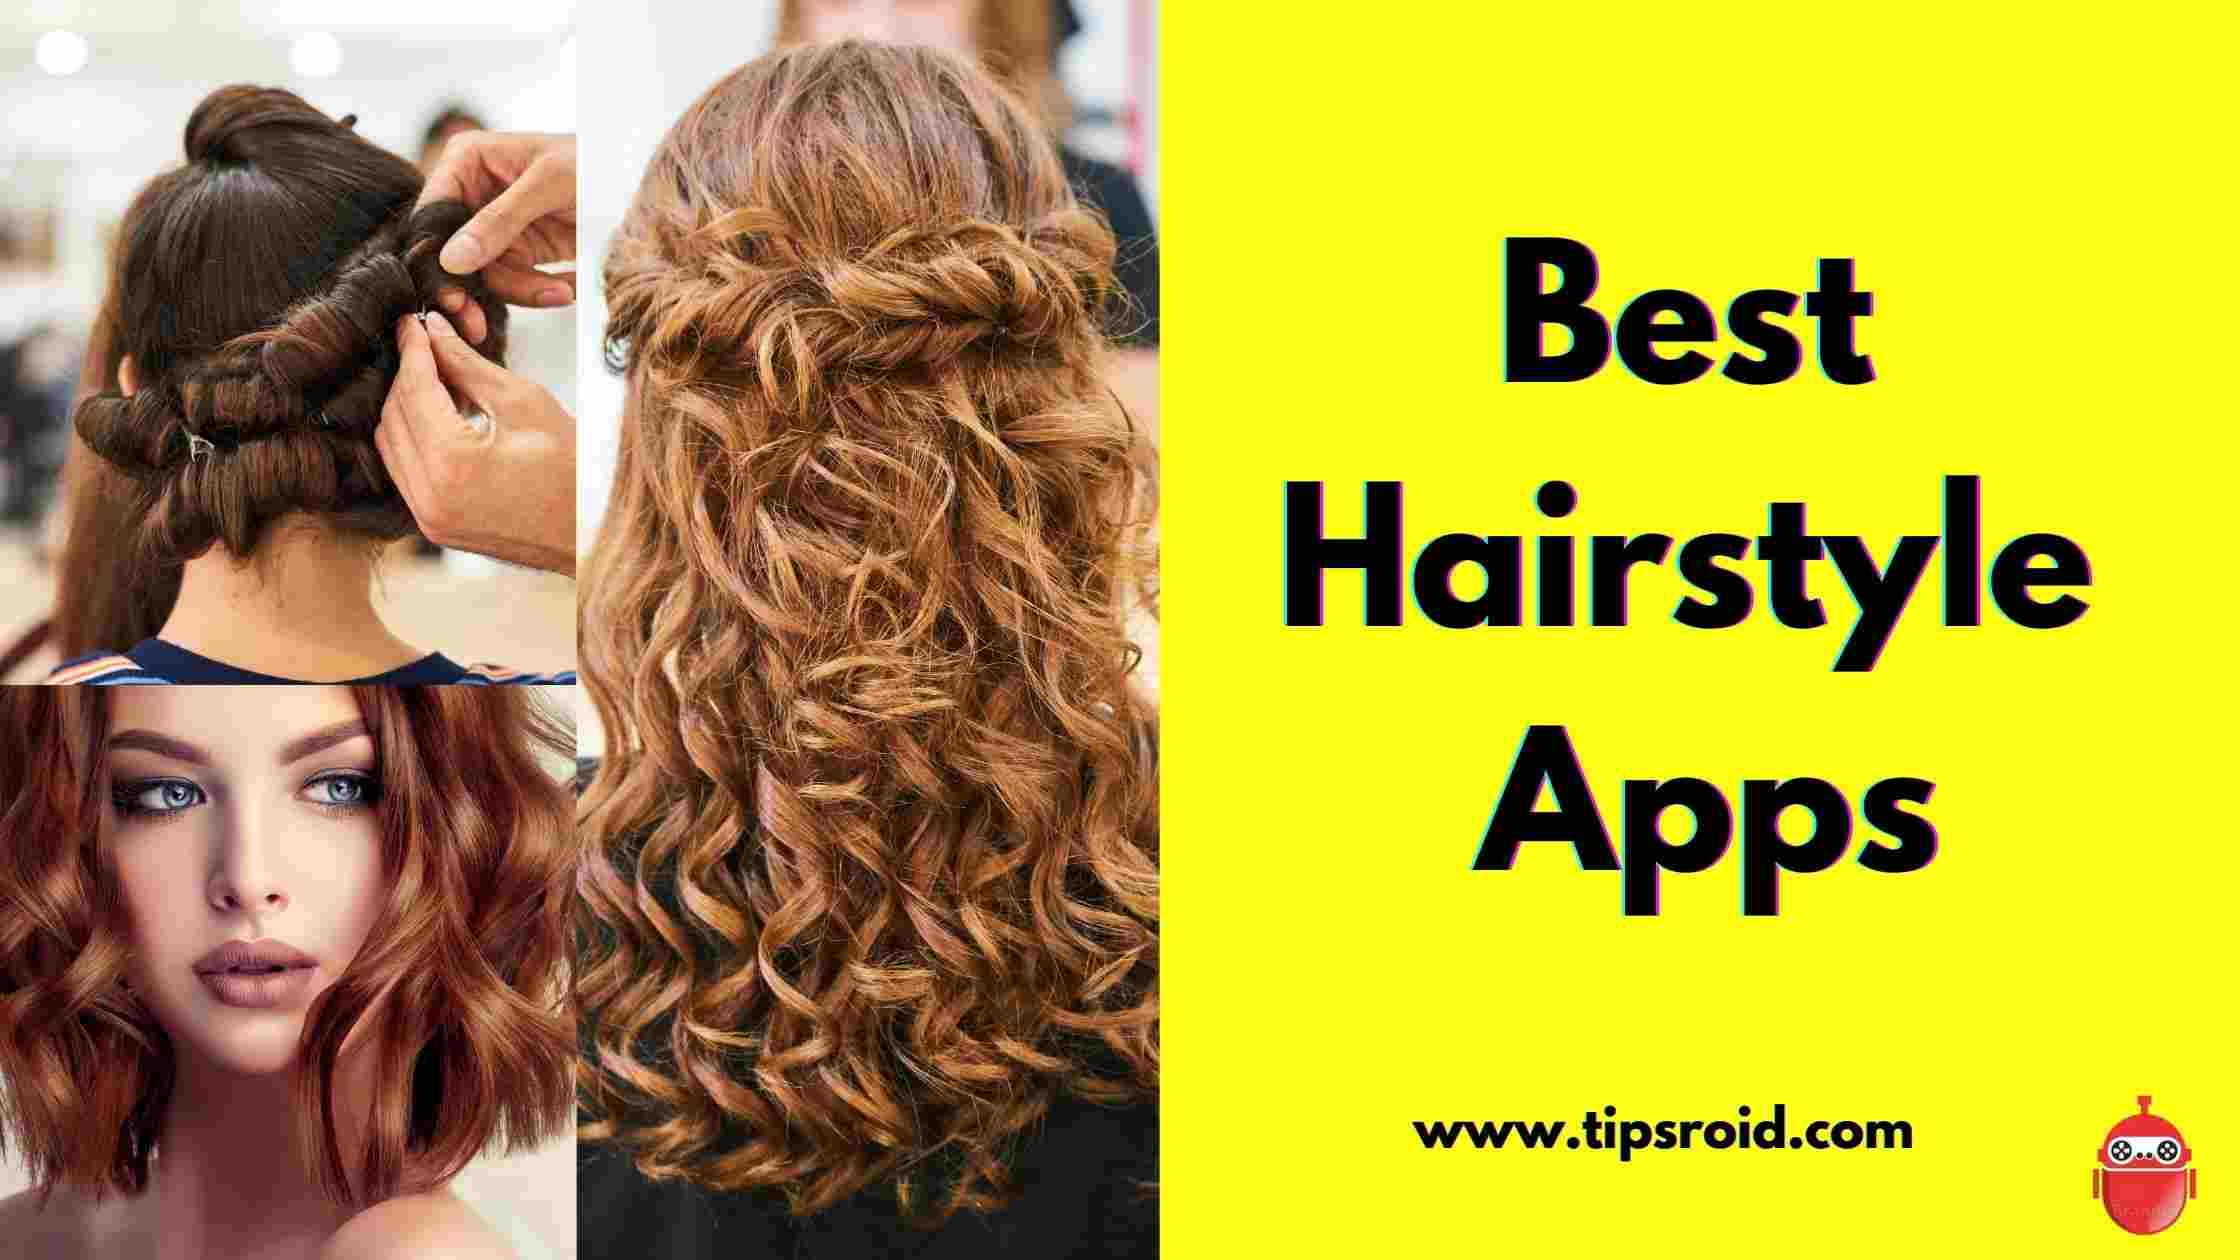 Best Hairstyle Apps